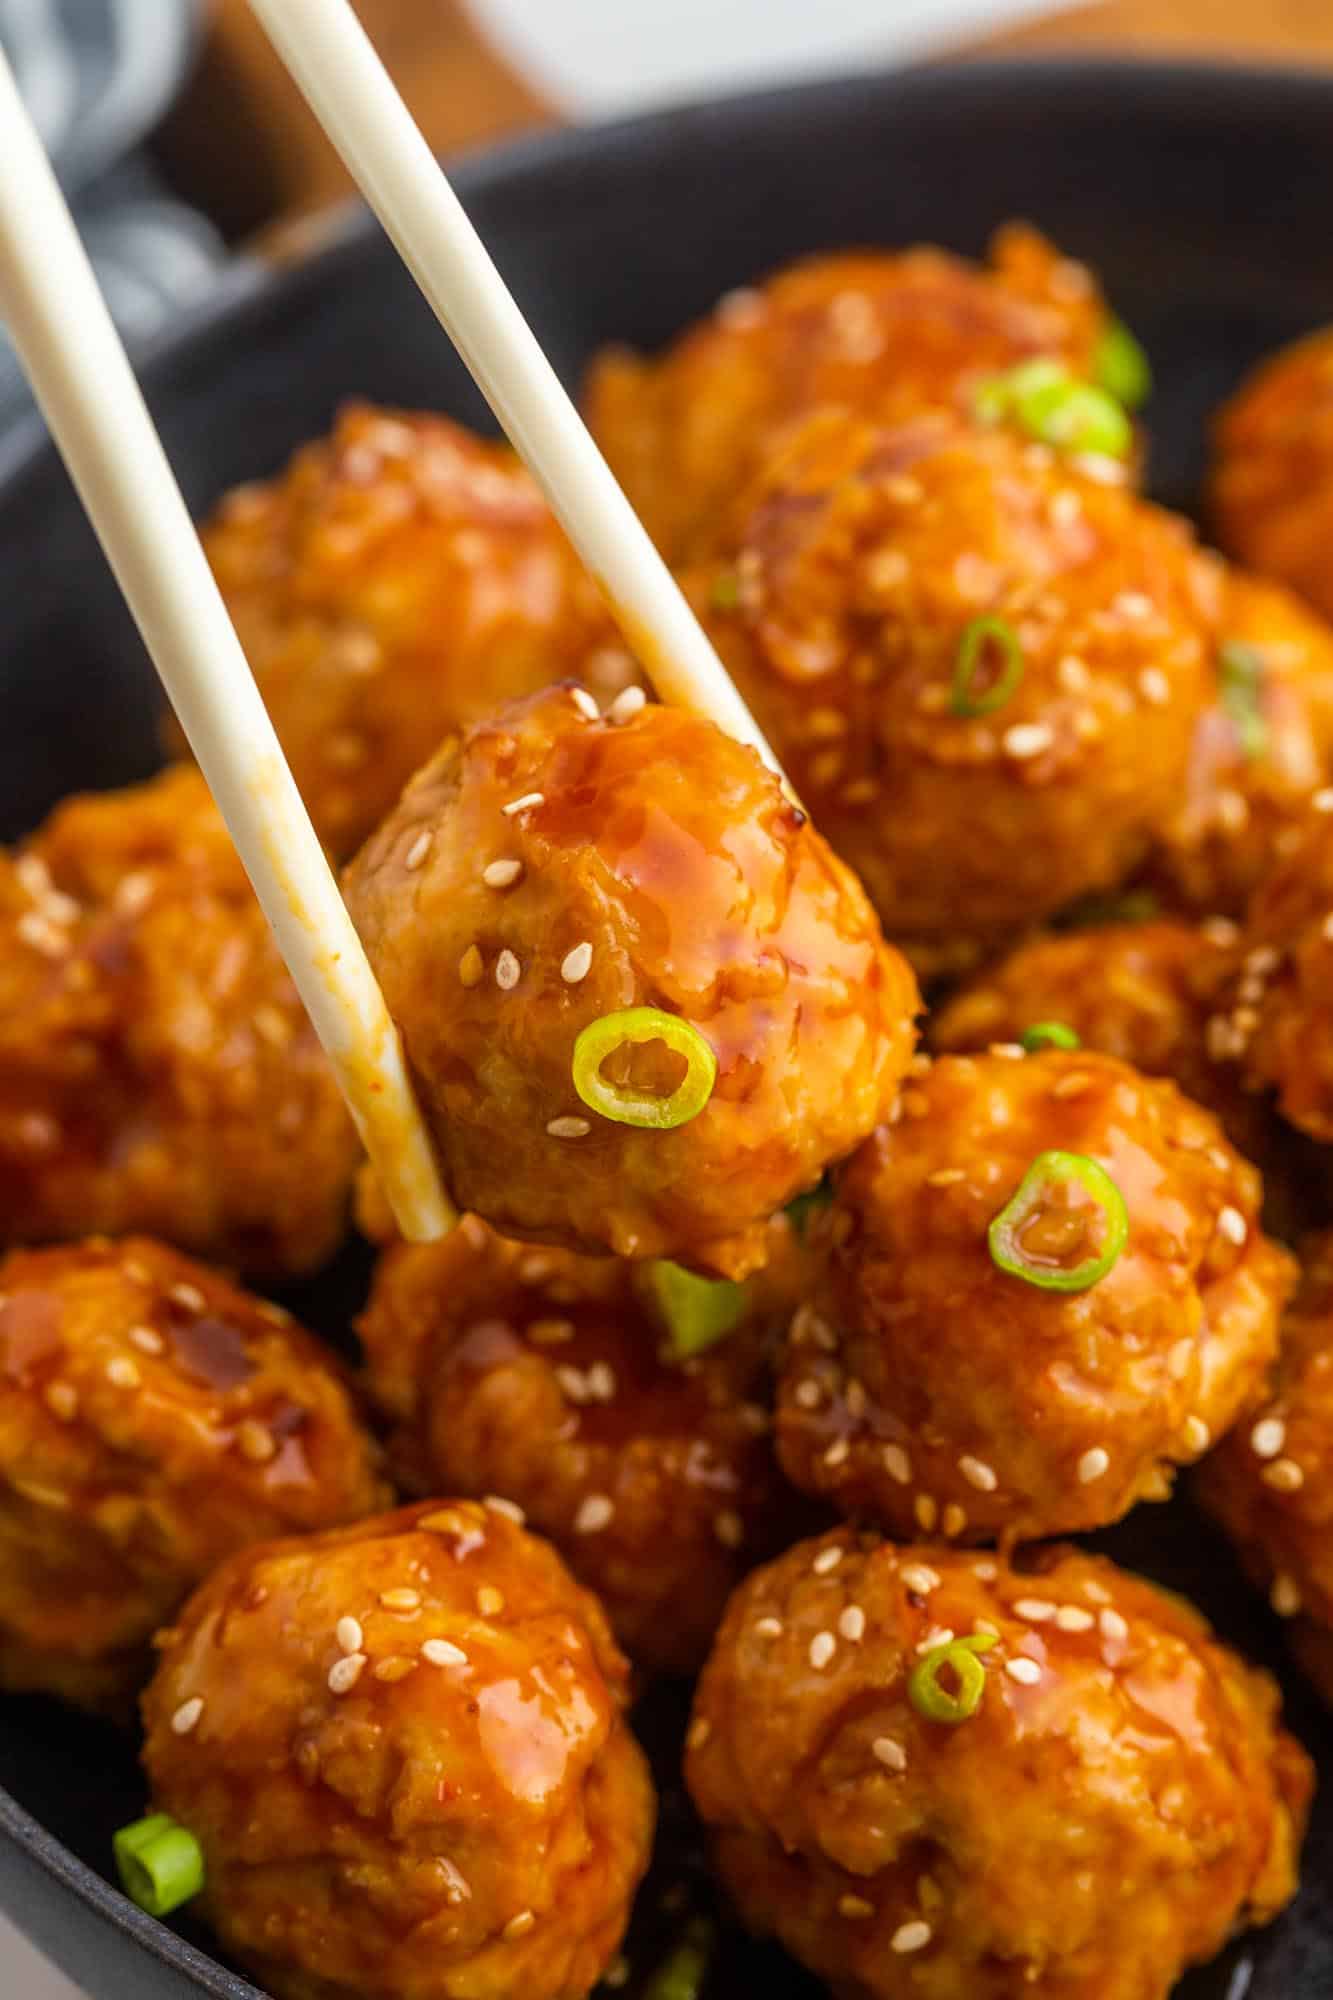 a black bowl of meatballs with asian sauce and sesame seeds. One is being held by chopsticks.